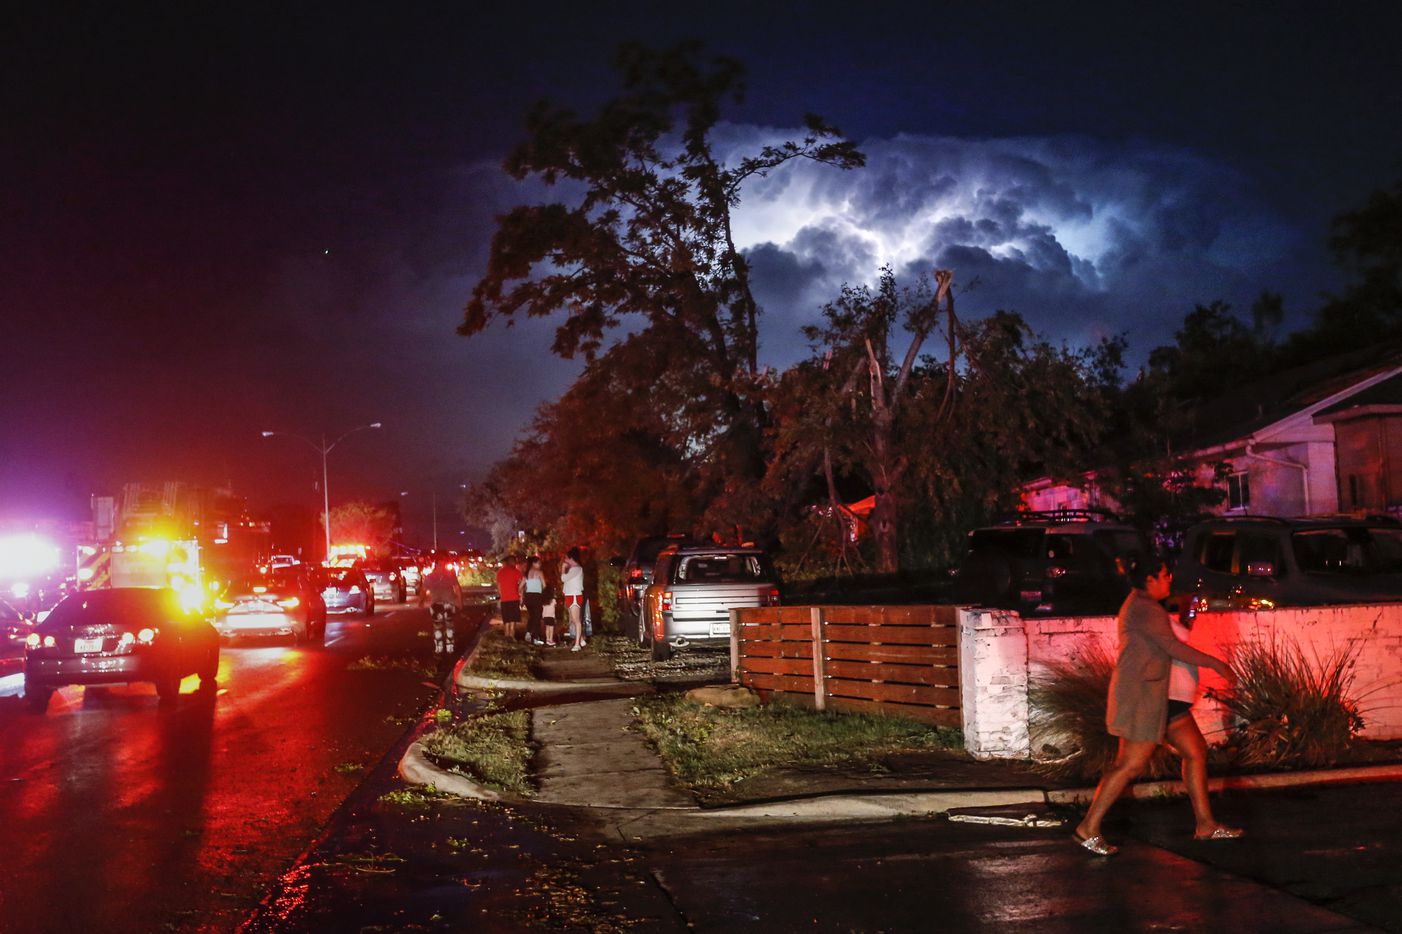 Lightning and emergency lights highlight damage as people gather in the parking lot of a shopping complex near the intersection of Walnut Hill Lane and Marsh Lane in Dallas where a tornado hit Sunday, Oct. 20, 2019.